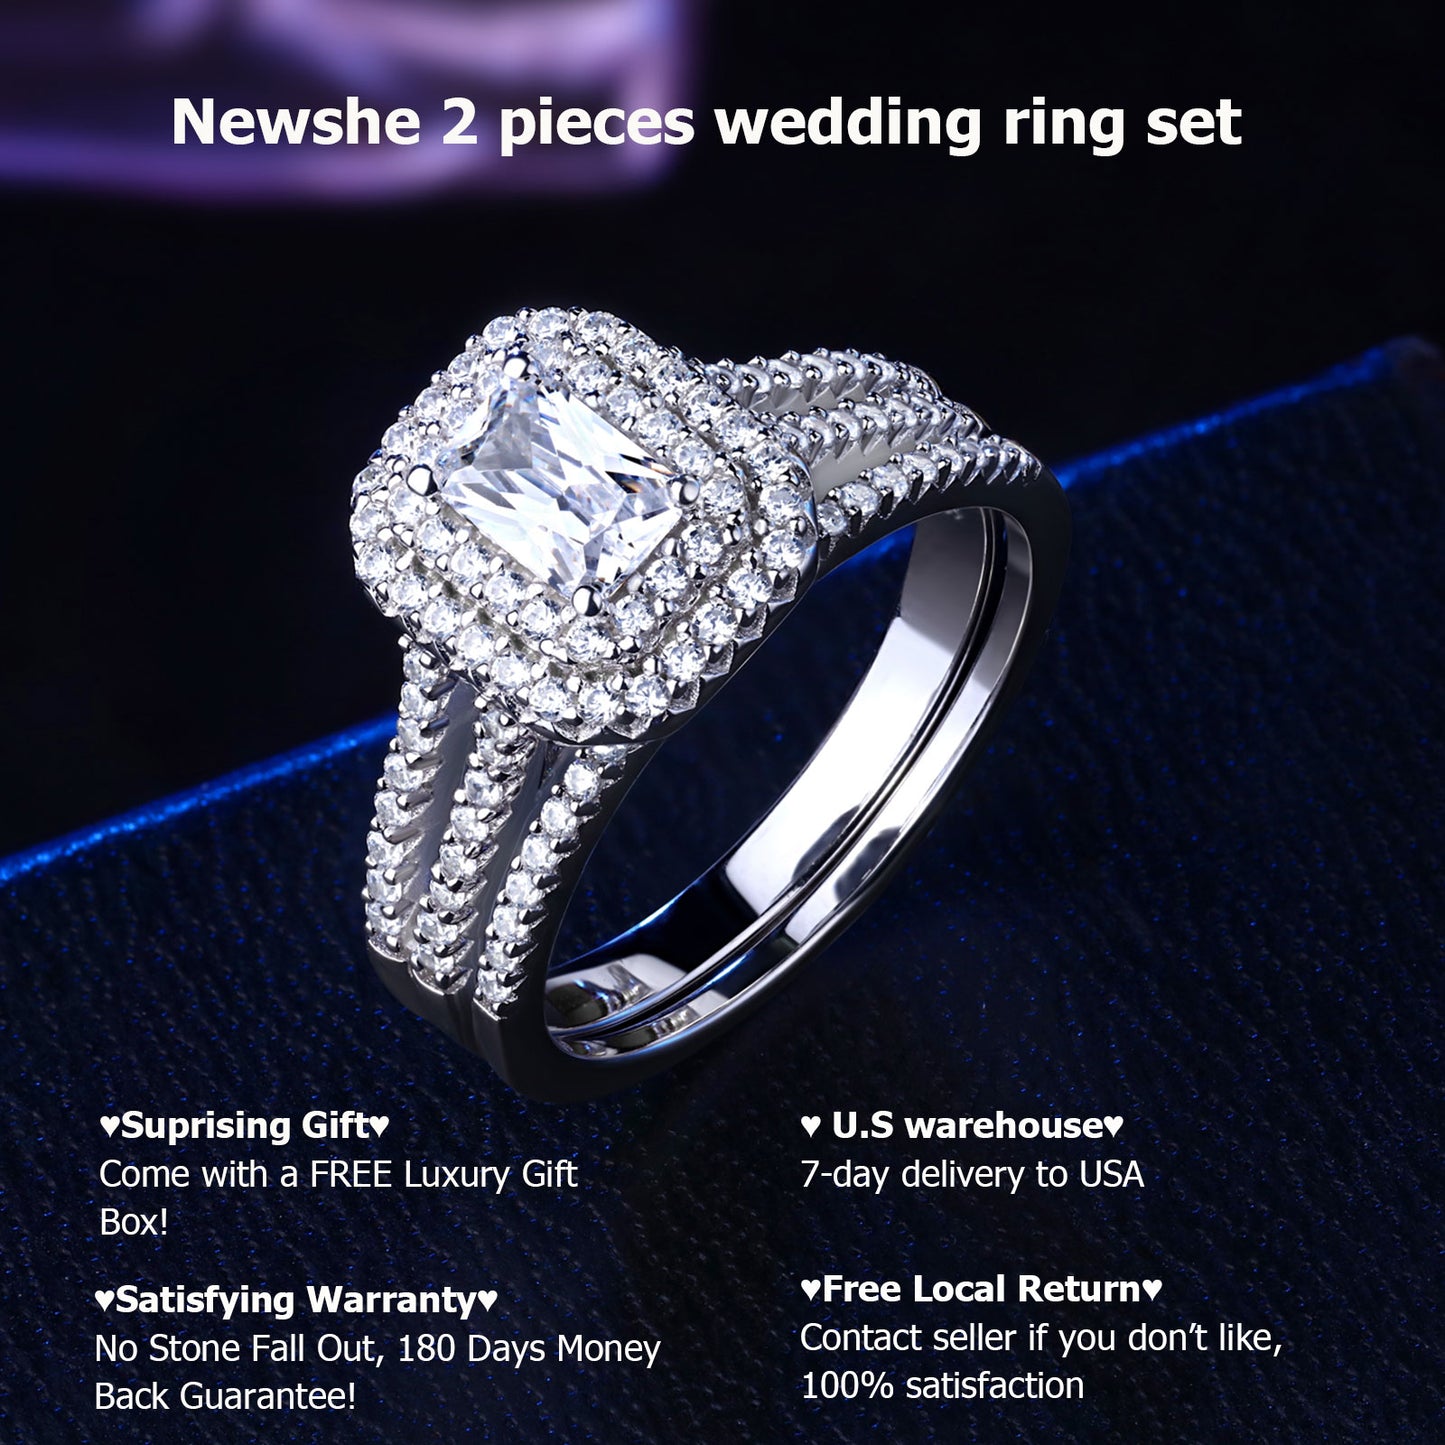 Newshe Solid 925 Silver Wedding Jewelry Double Halo Radiant Cut Engagement Bridal Rings for Women White AAAAA Cubic Zirconia